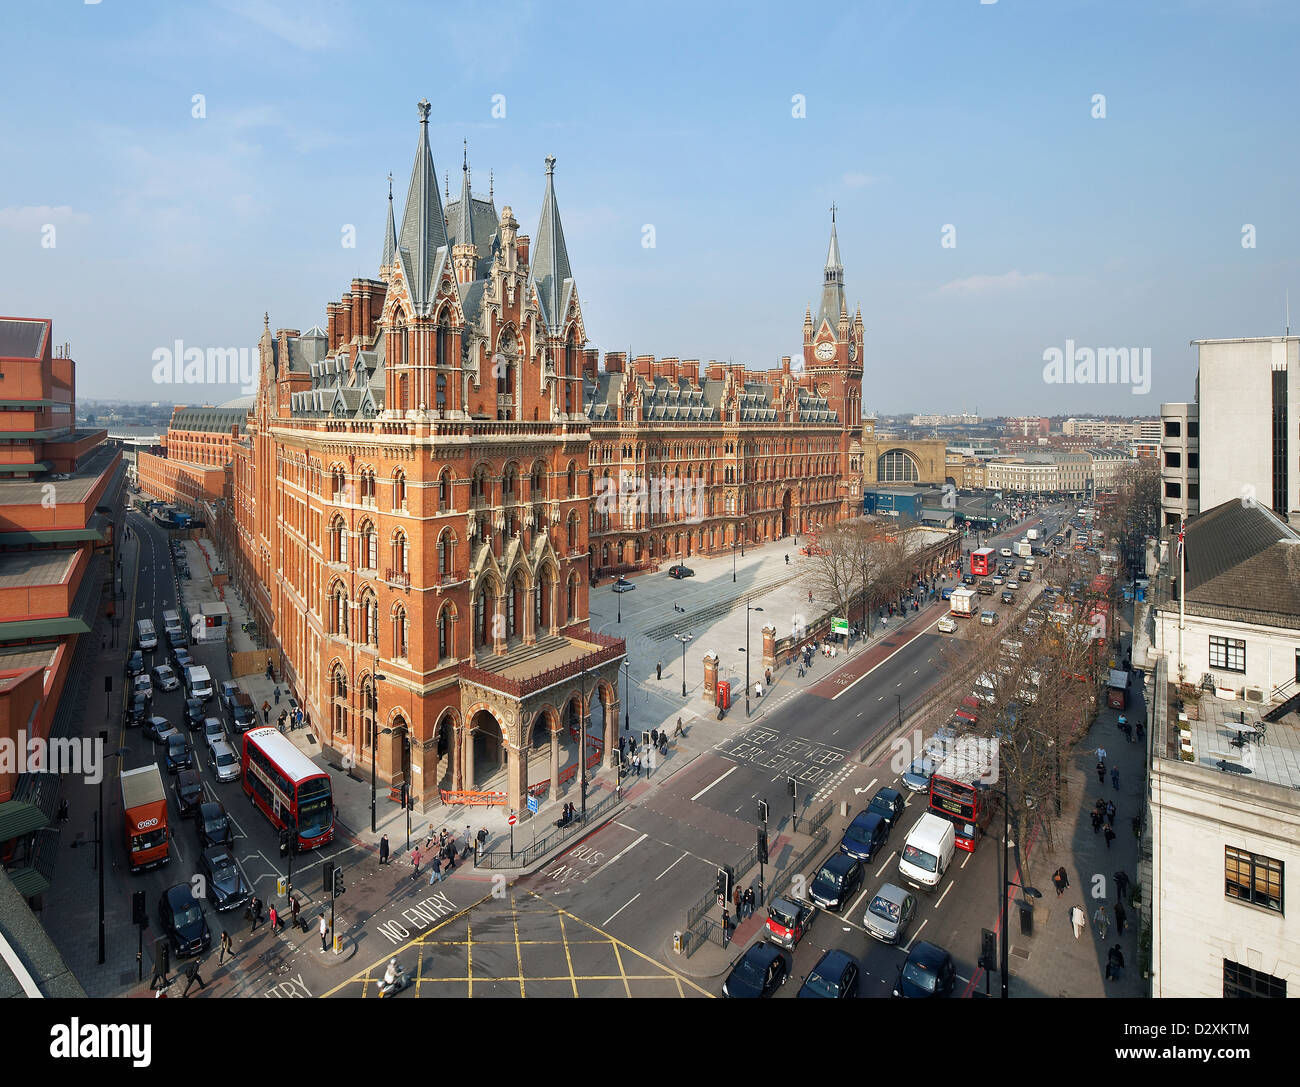 St Pancras Hotel, London, United Kingdom. Architect: Sir Giles Gilbert Scott with Richard Griffiths Arc, 2011. Grand  and compre Stock Photo